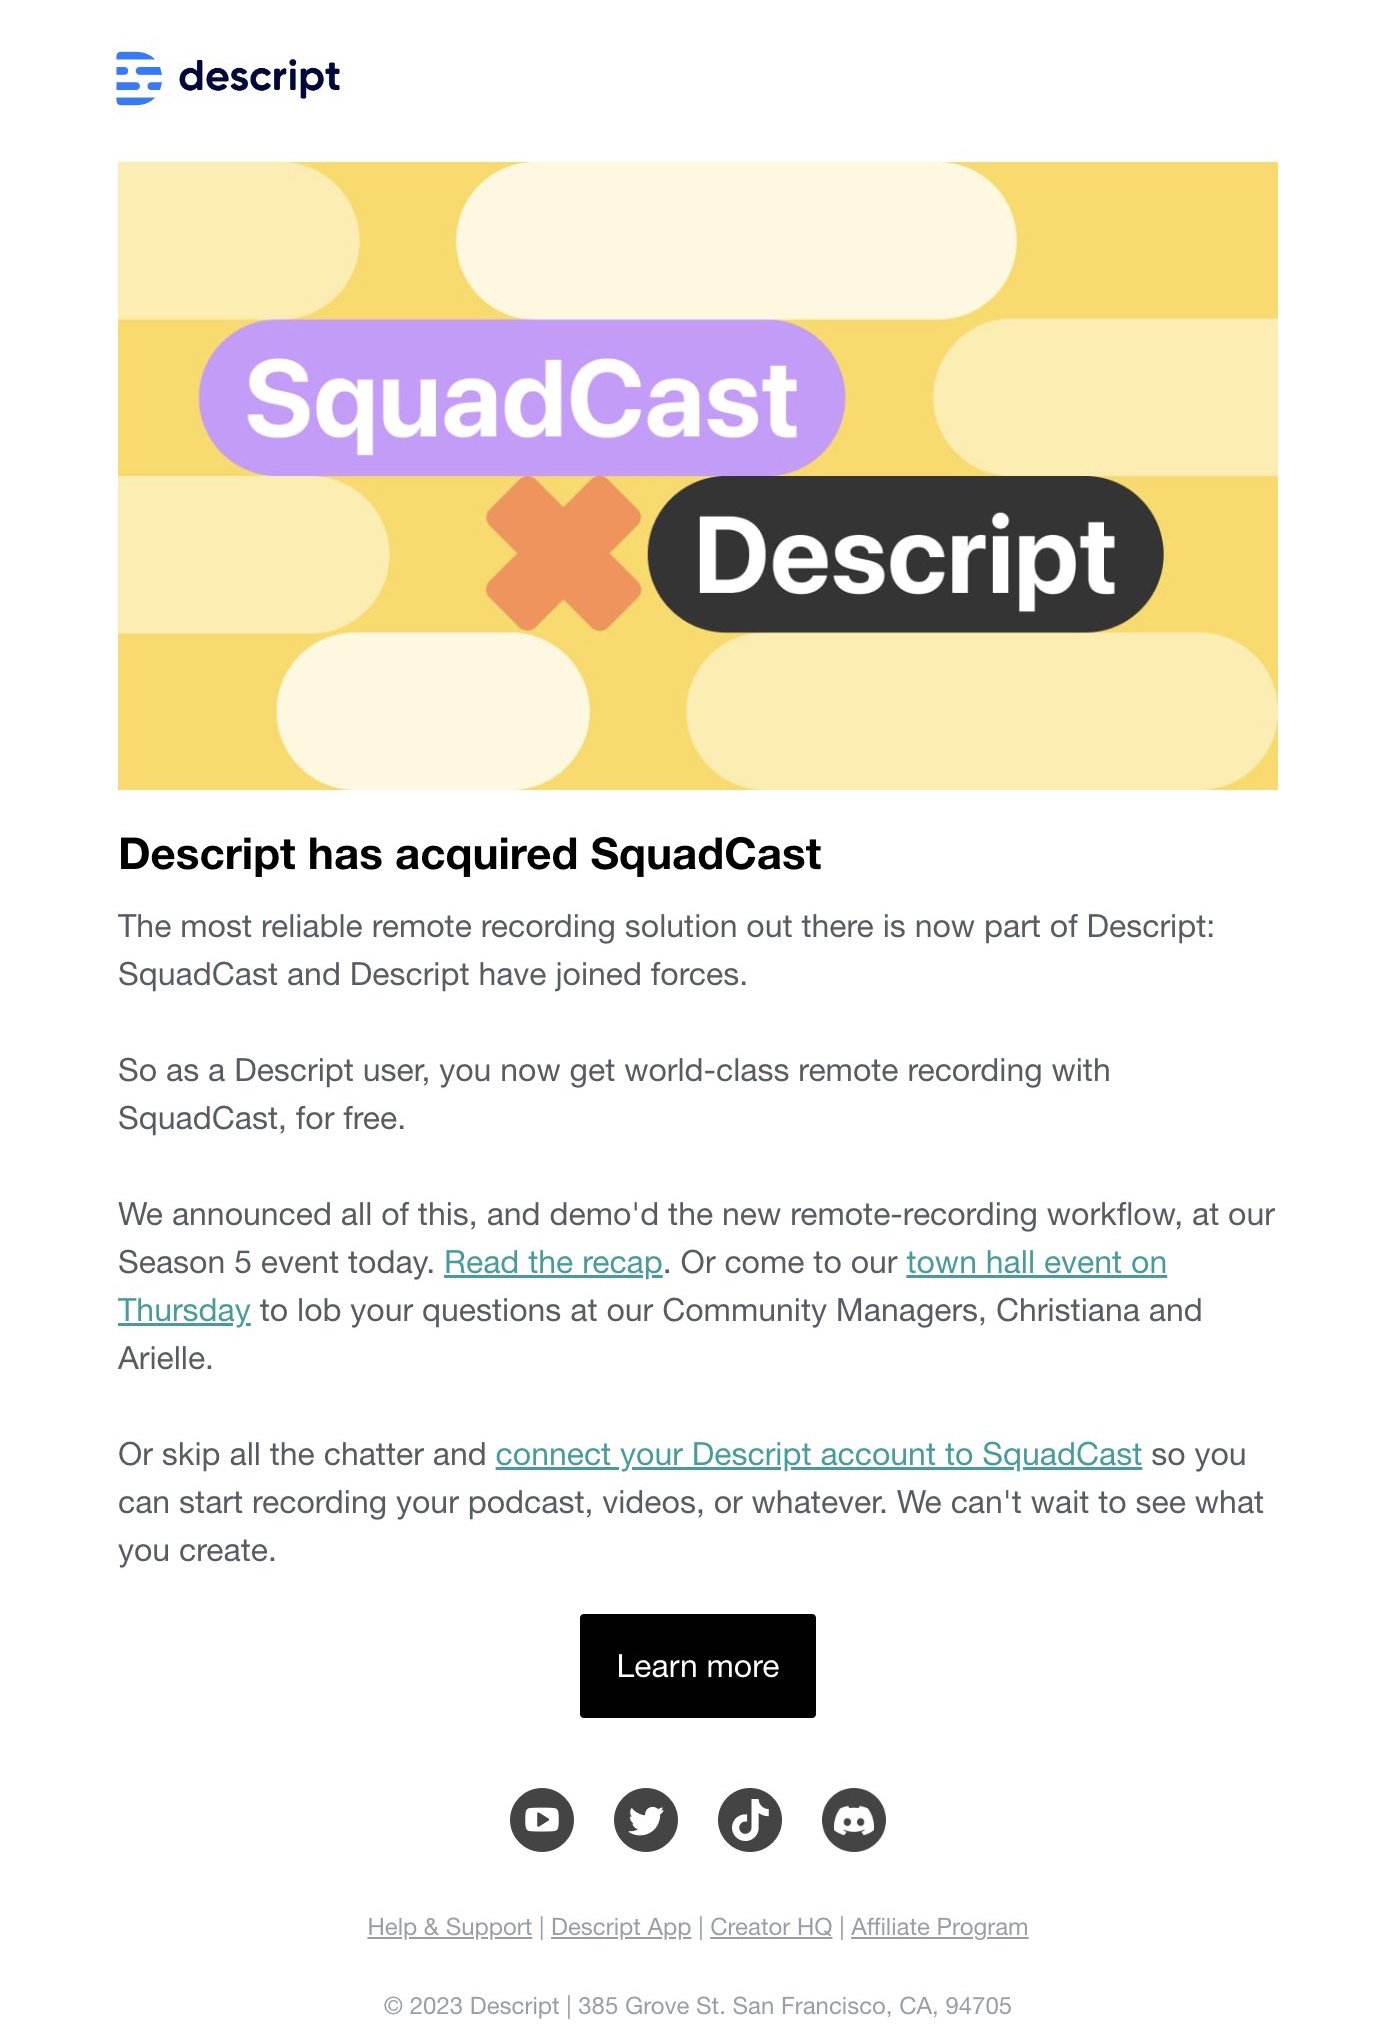 SaaS Company Acquisition Announcement Emails: Screenshot of Descript's announcement email when they acquired Squadcast